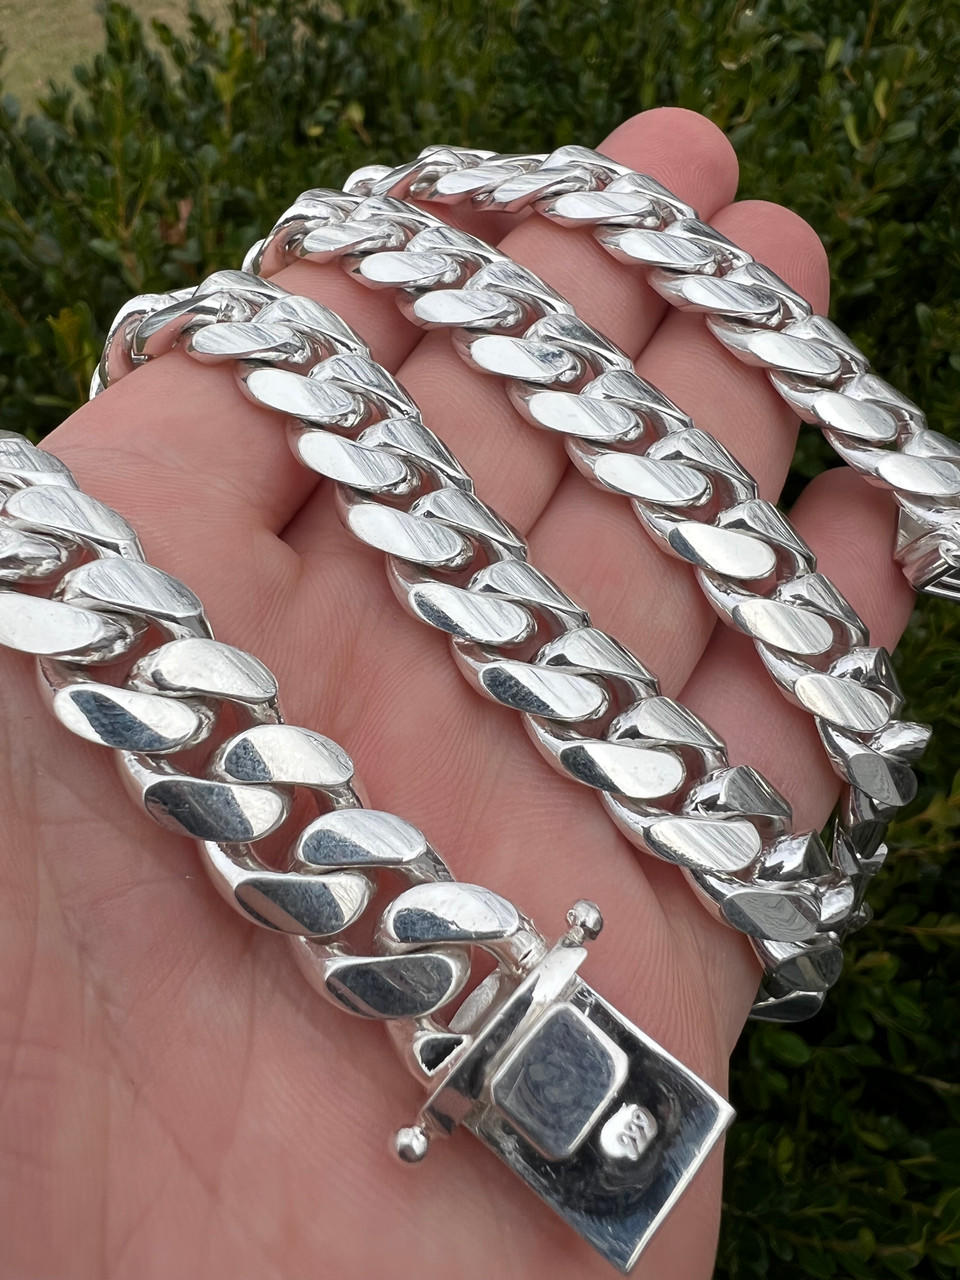 Ladies Fashion - Bracelets - Handcrafted Fine Silver Bracelets - Interact  China